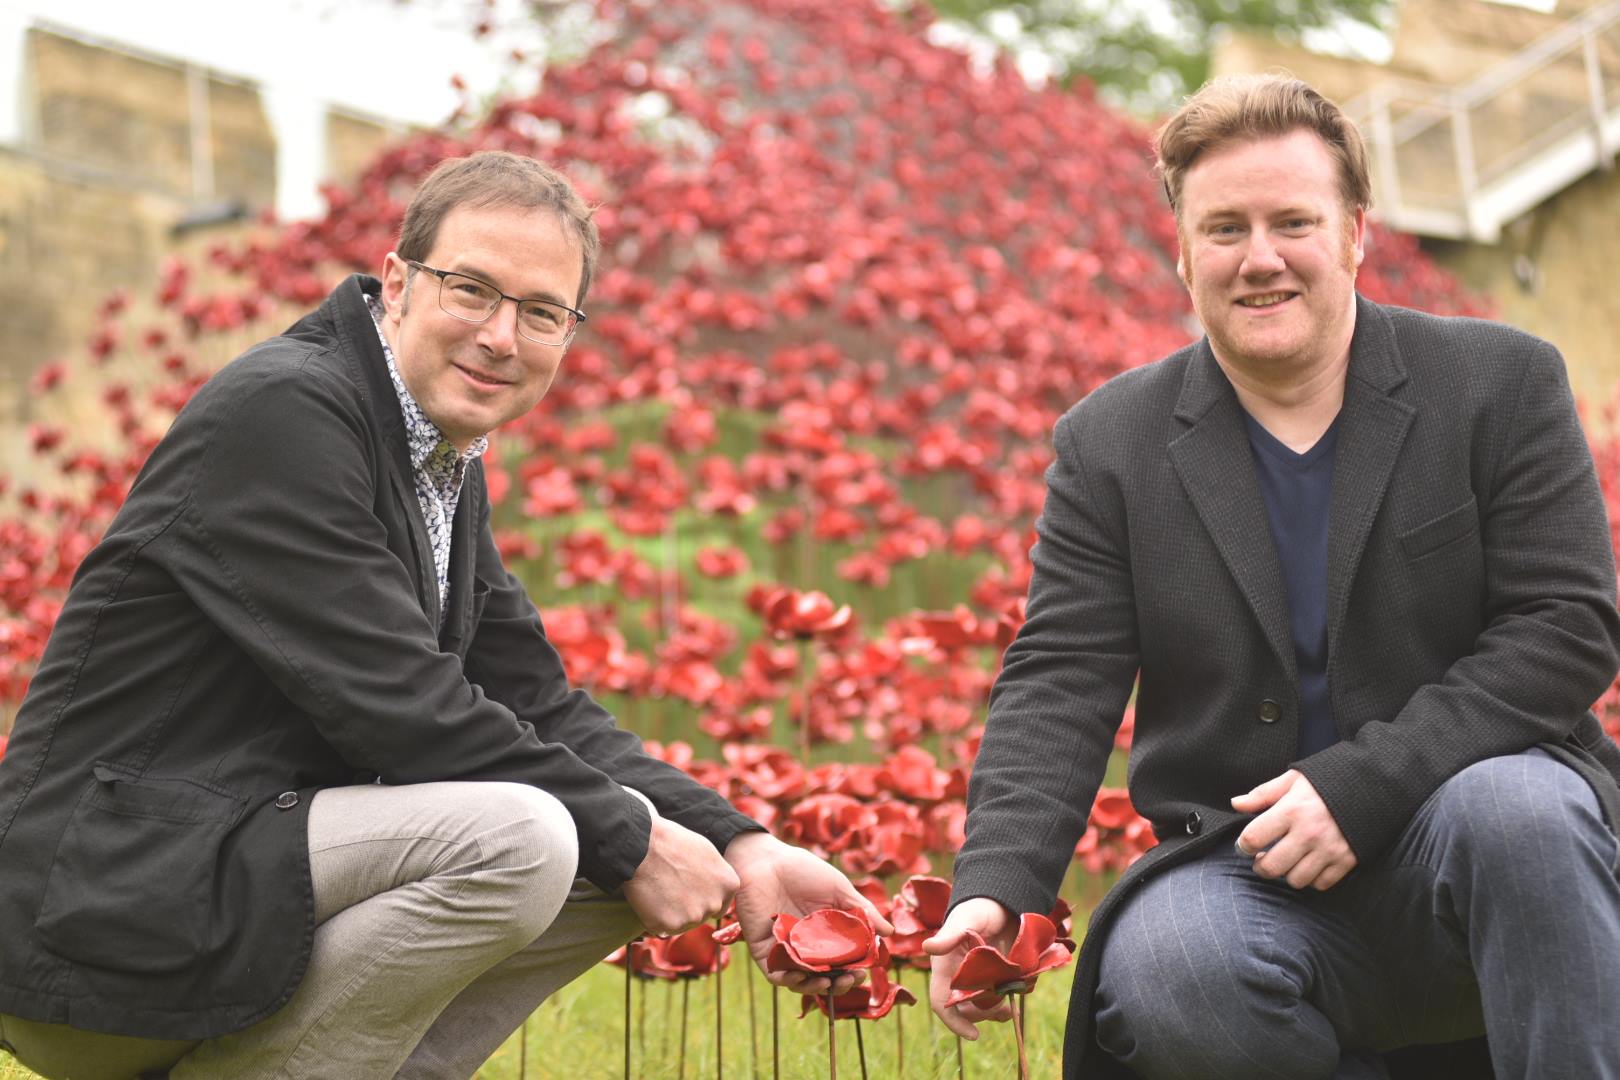 Designer Tom Piper and artist Paul Cummins at Lincoln Castle for Poppies: Wave. Photo: Steve Smailes for The Lincolnite